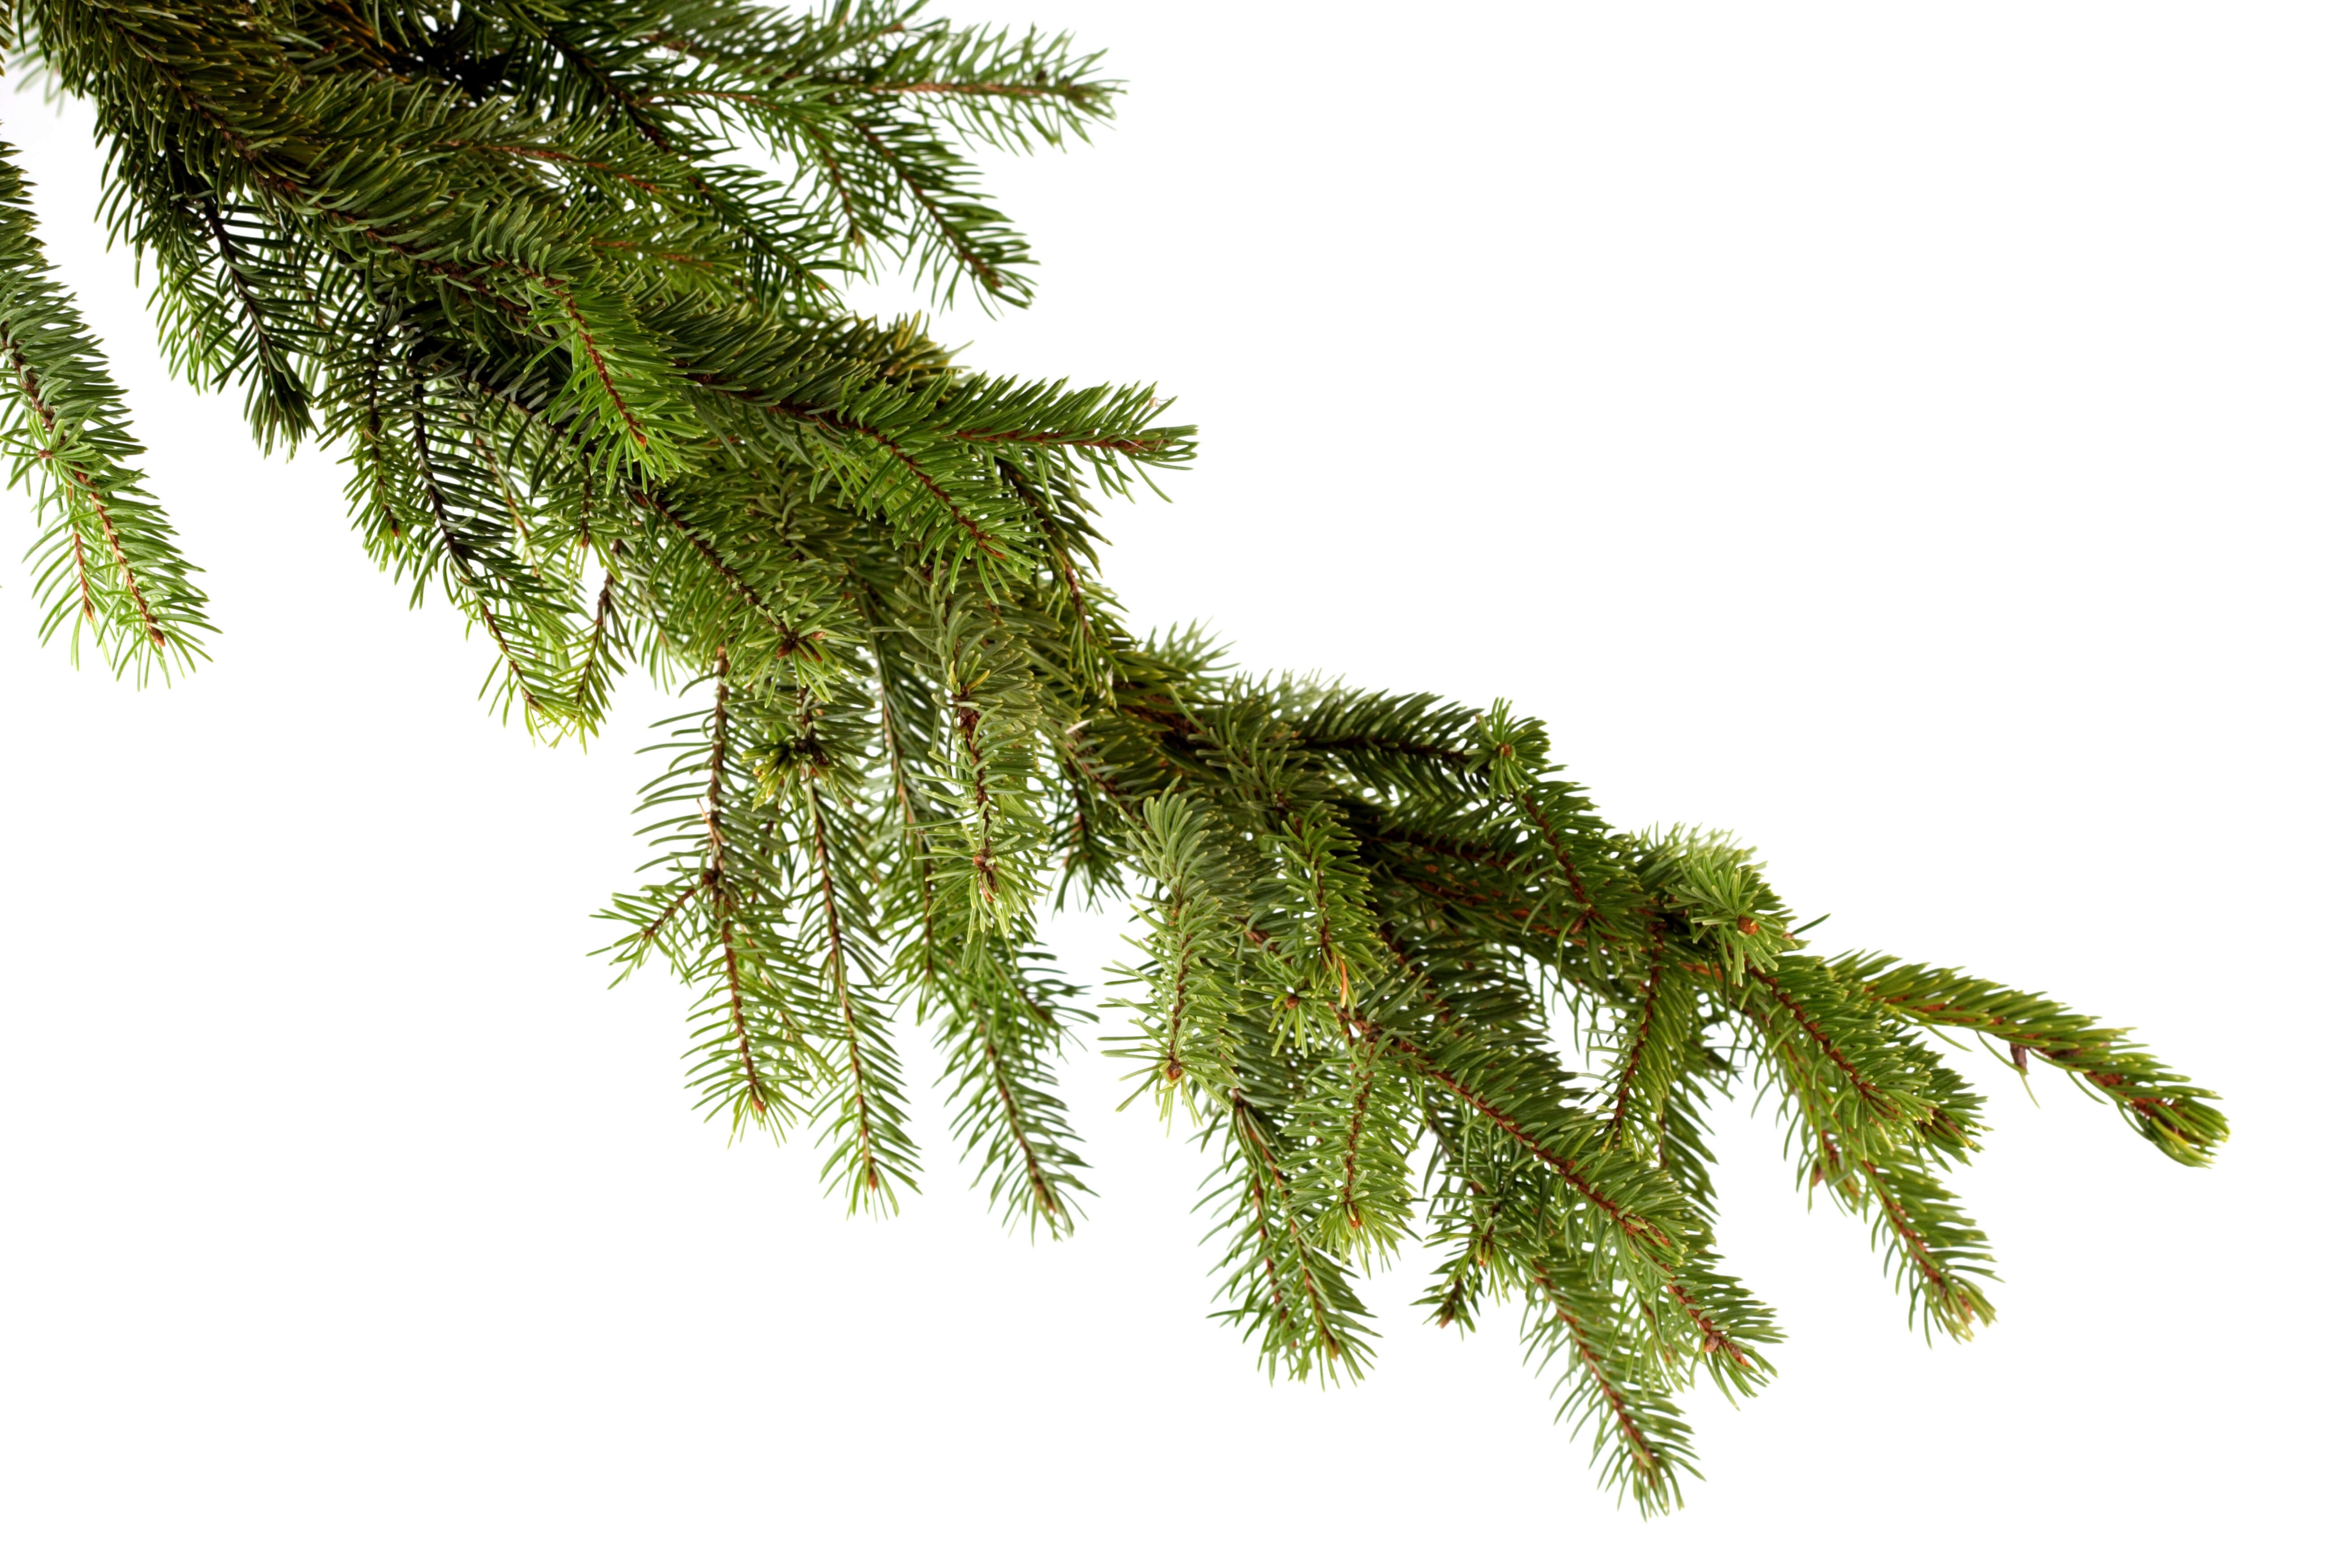 Pine branch on white background - Southside Times